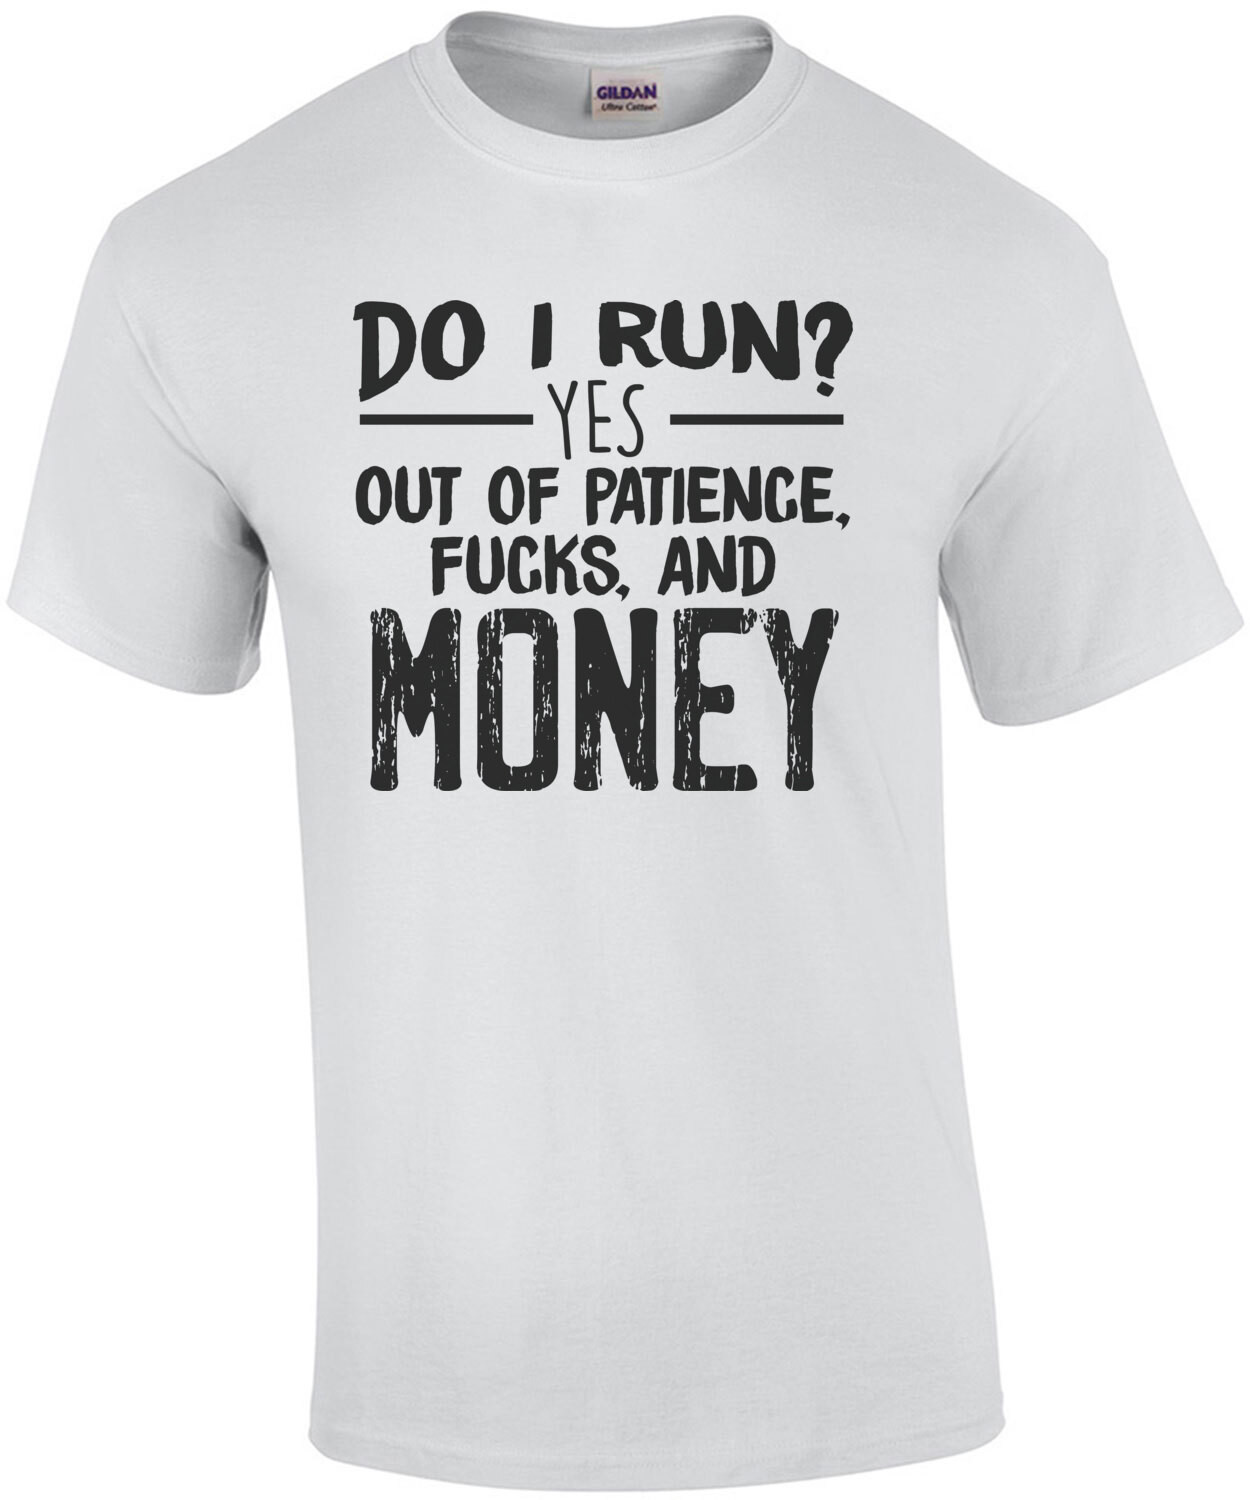 Do I run? YES - out of patience, fucks, and money - funny sarcastic t-shirt